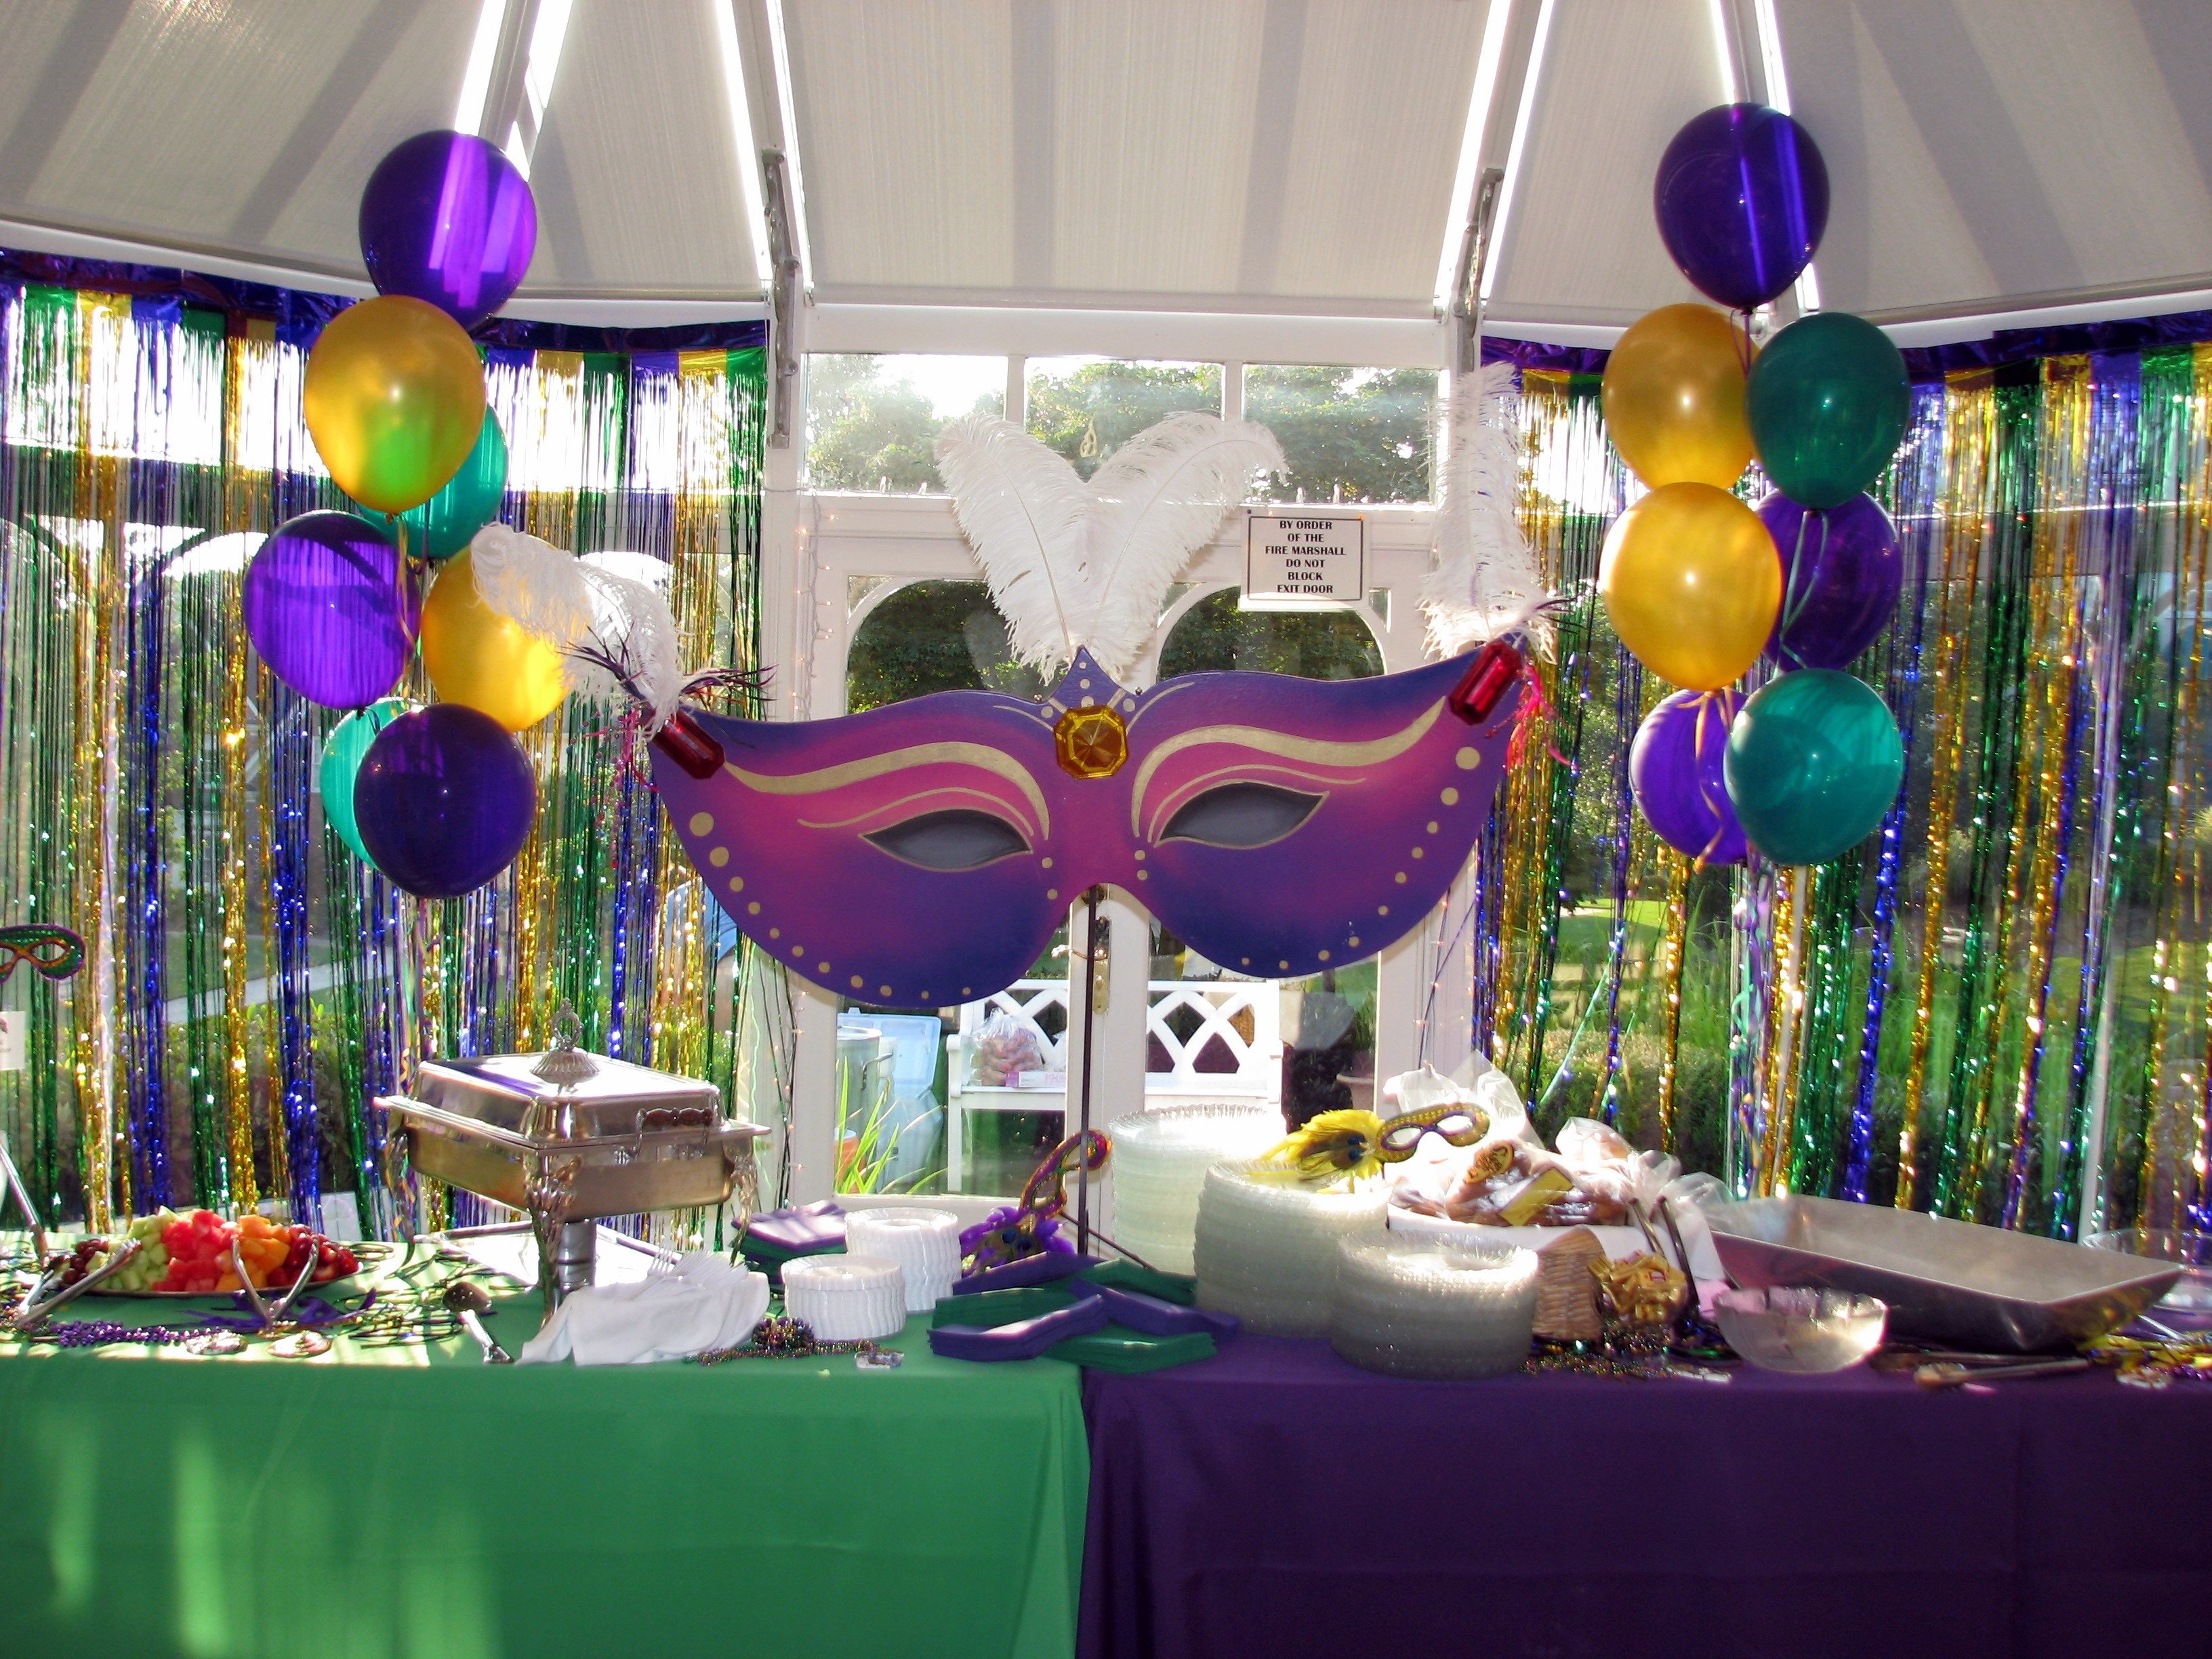 10 Fabulous Mardi Gras Party Ideas For Adults mardi gras party recipes ideas mardi gras themed 40th surprise 1 2022